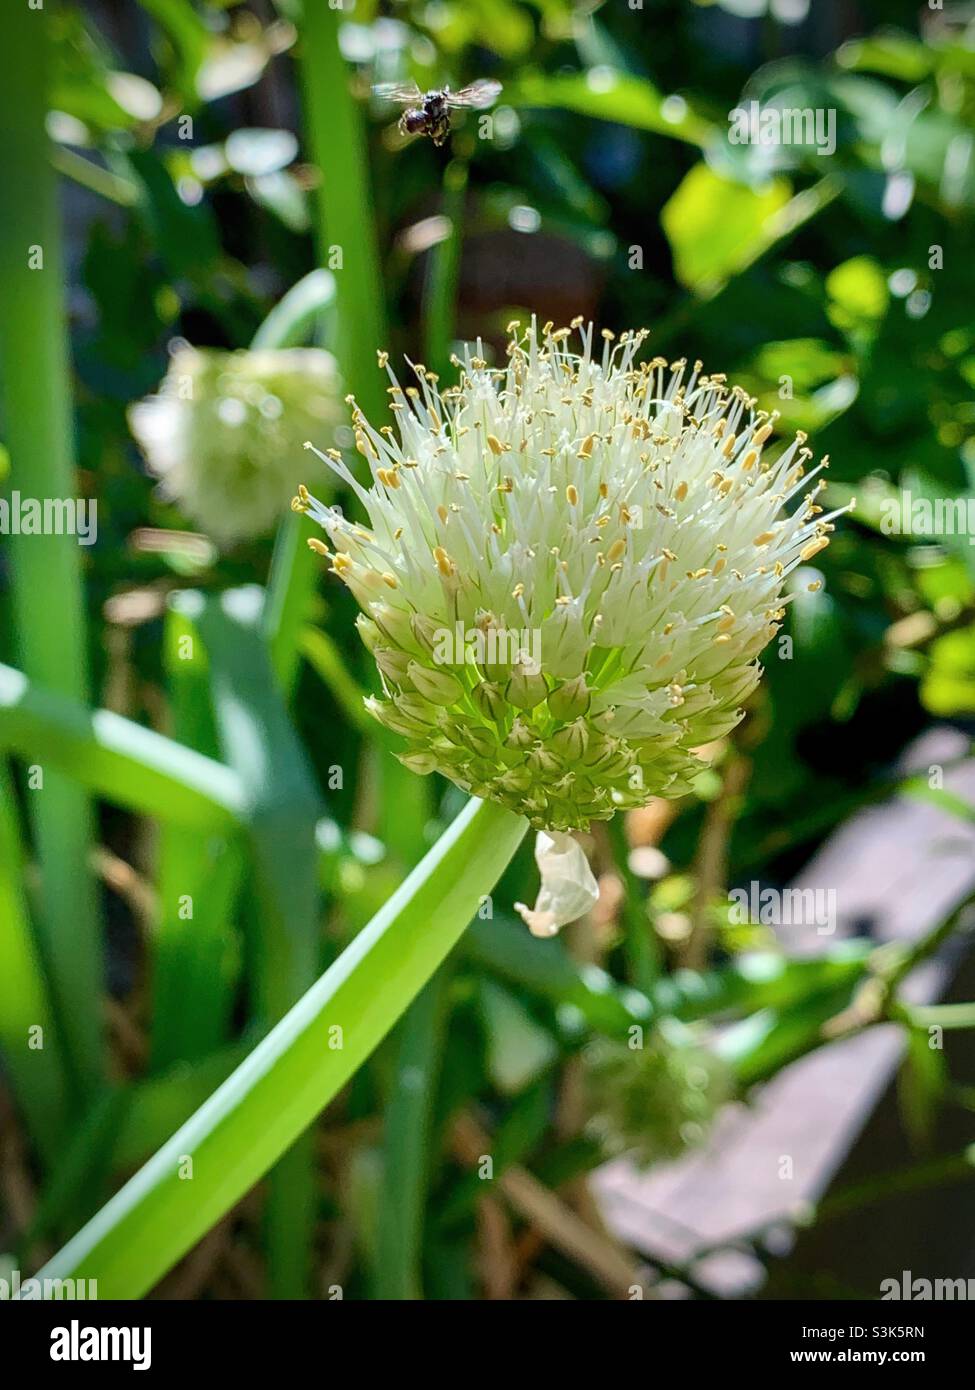 Close up of an immature flower umbel and scape of a Garlic Chive (Allium tuberosum) attracting an Australian native bee in a backyard garden. Stock Photo